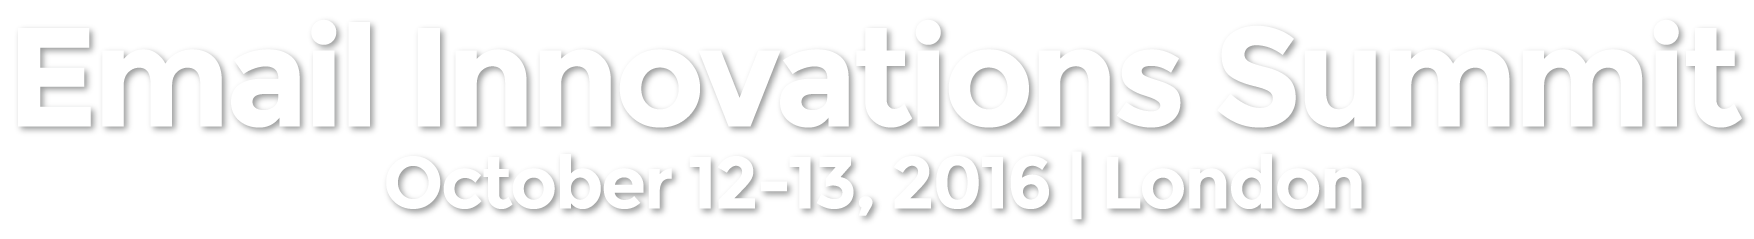 Email Innovations Summit: Las Vegas / May 17-19, 2016 / The Rio Suites Hotel